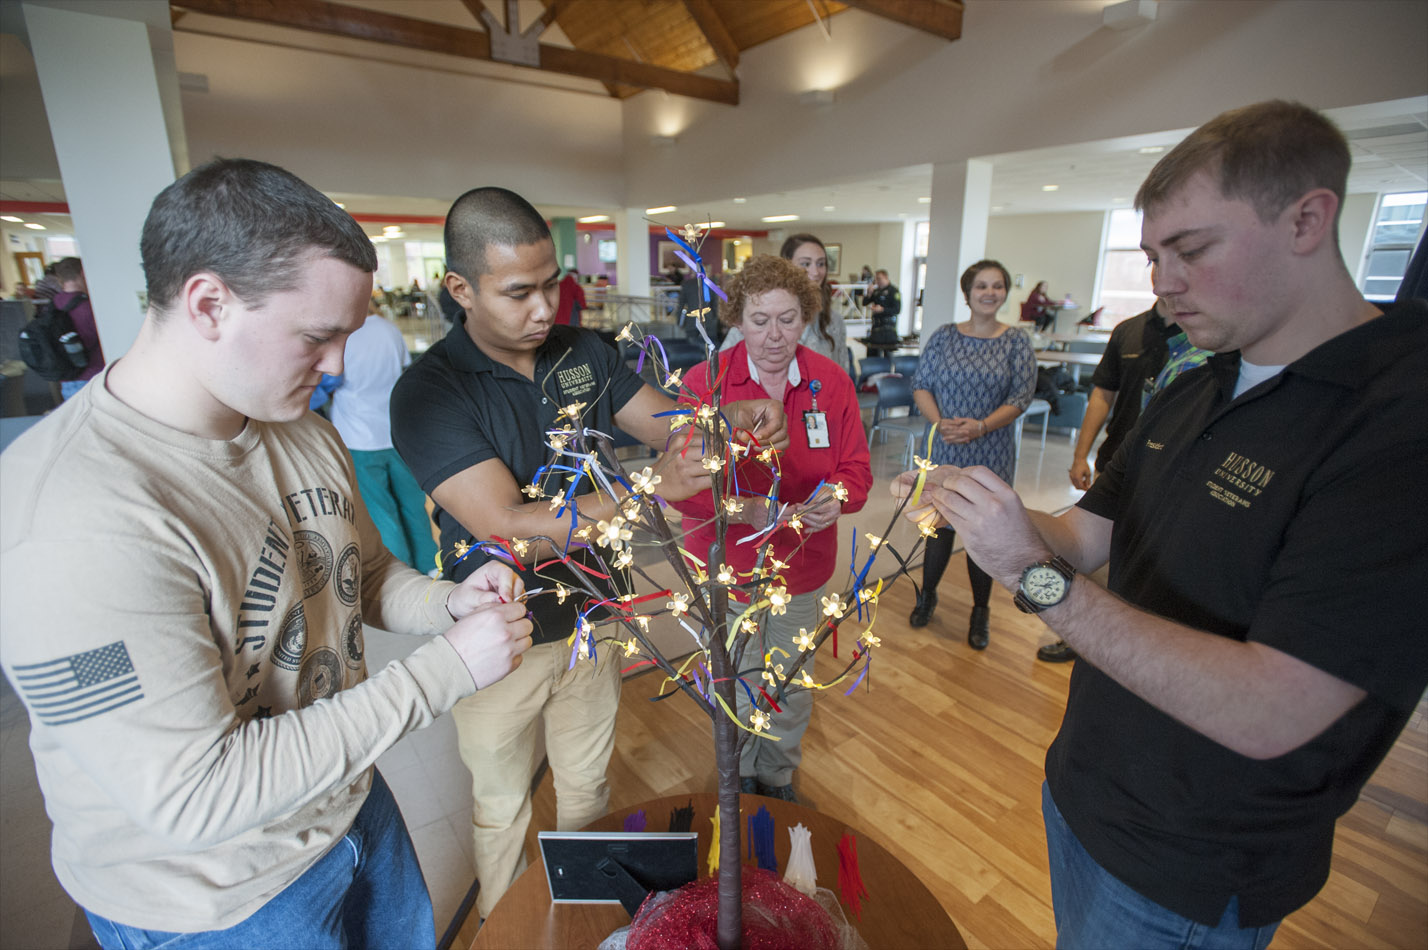 Student Veterans attend the Veterans week activities on campus of Husson University